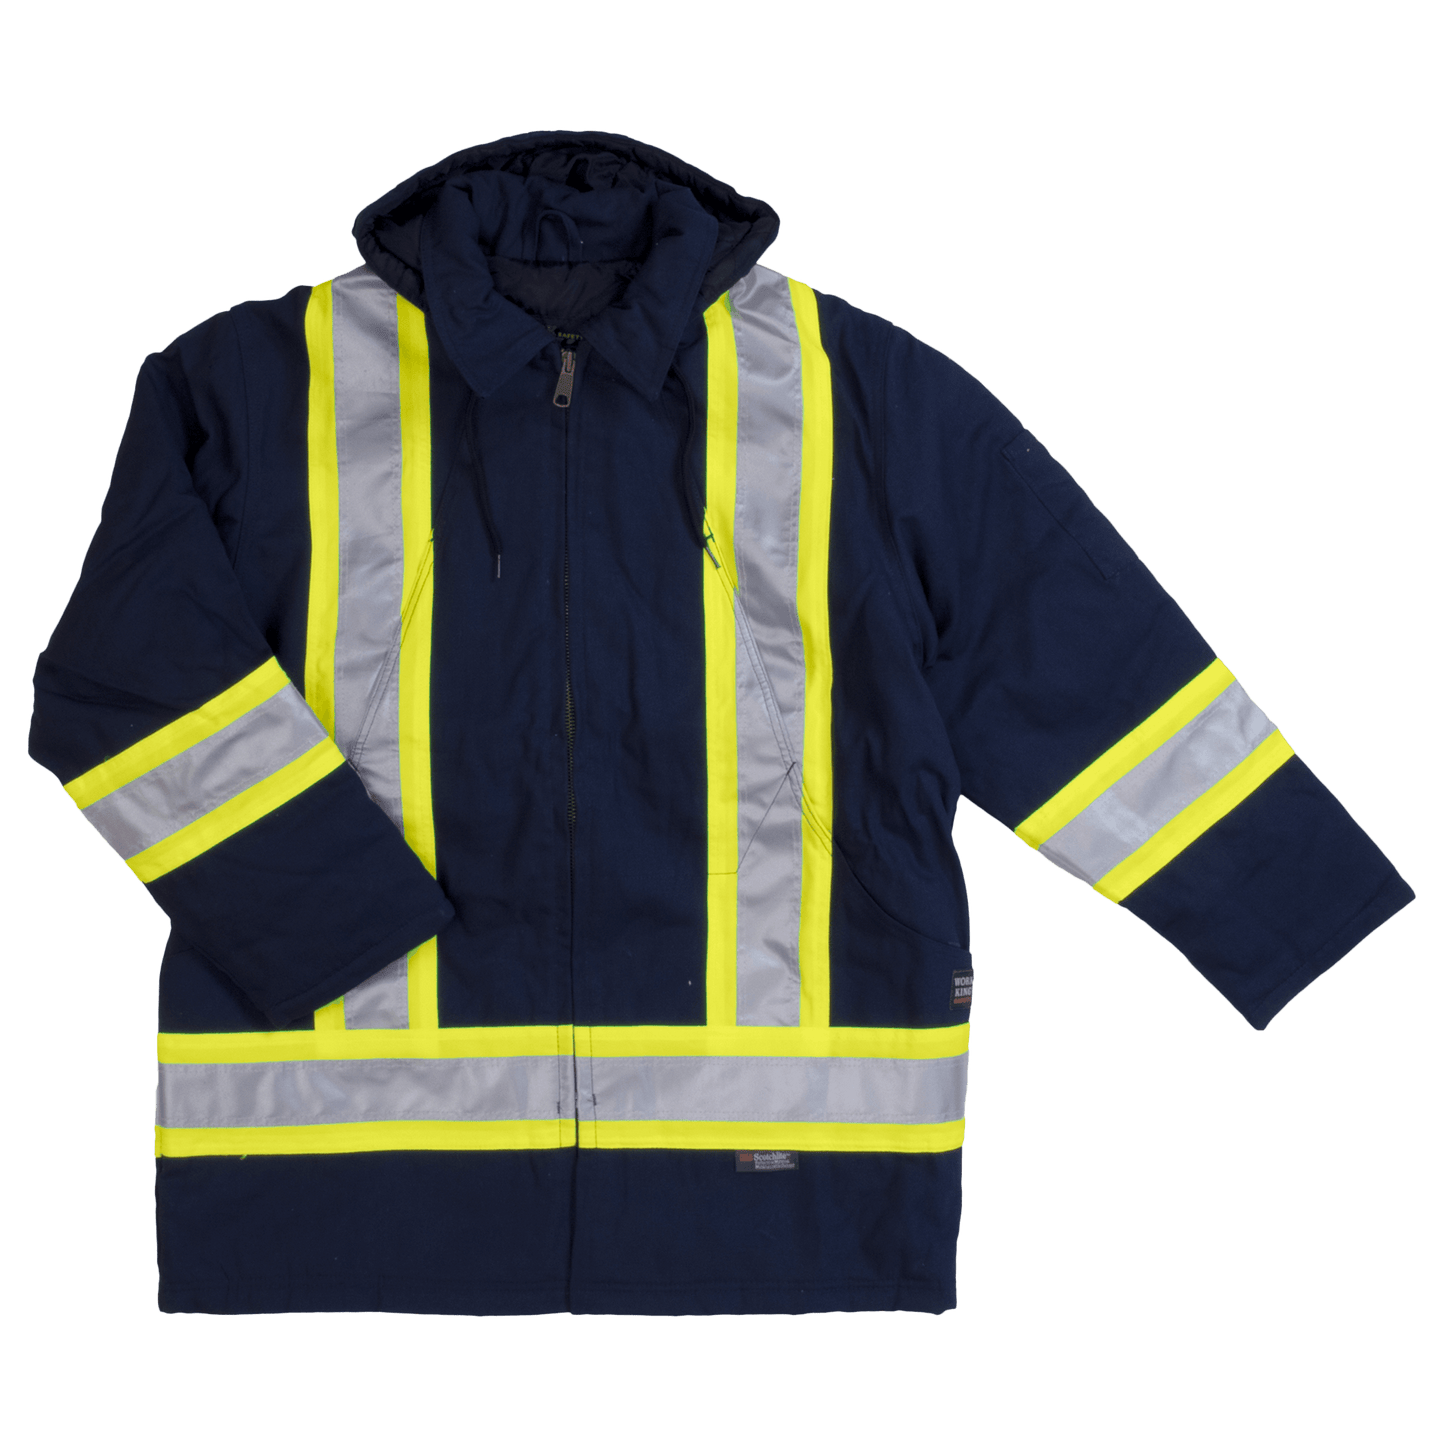 Tough Duck Fleece Lined Safety Jacket - S157 - Navy